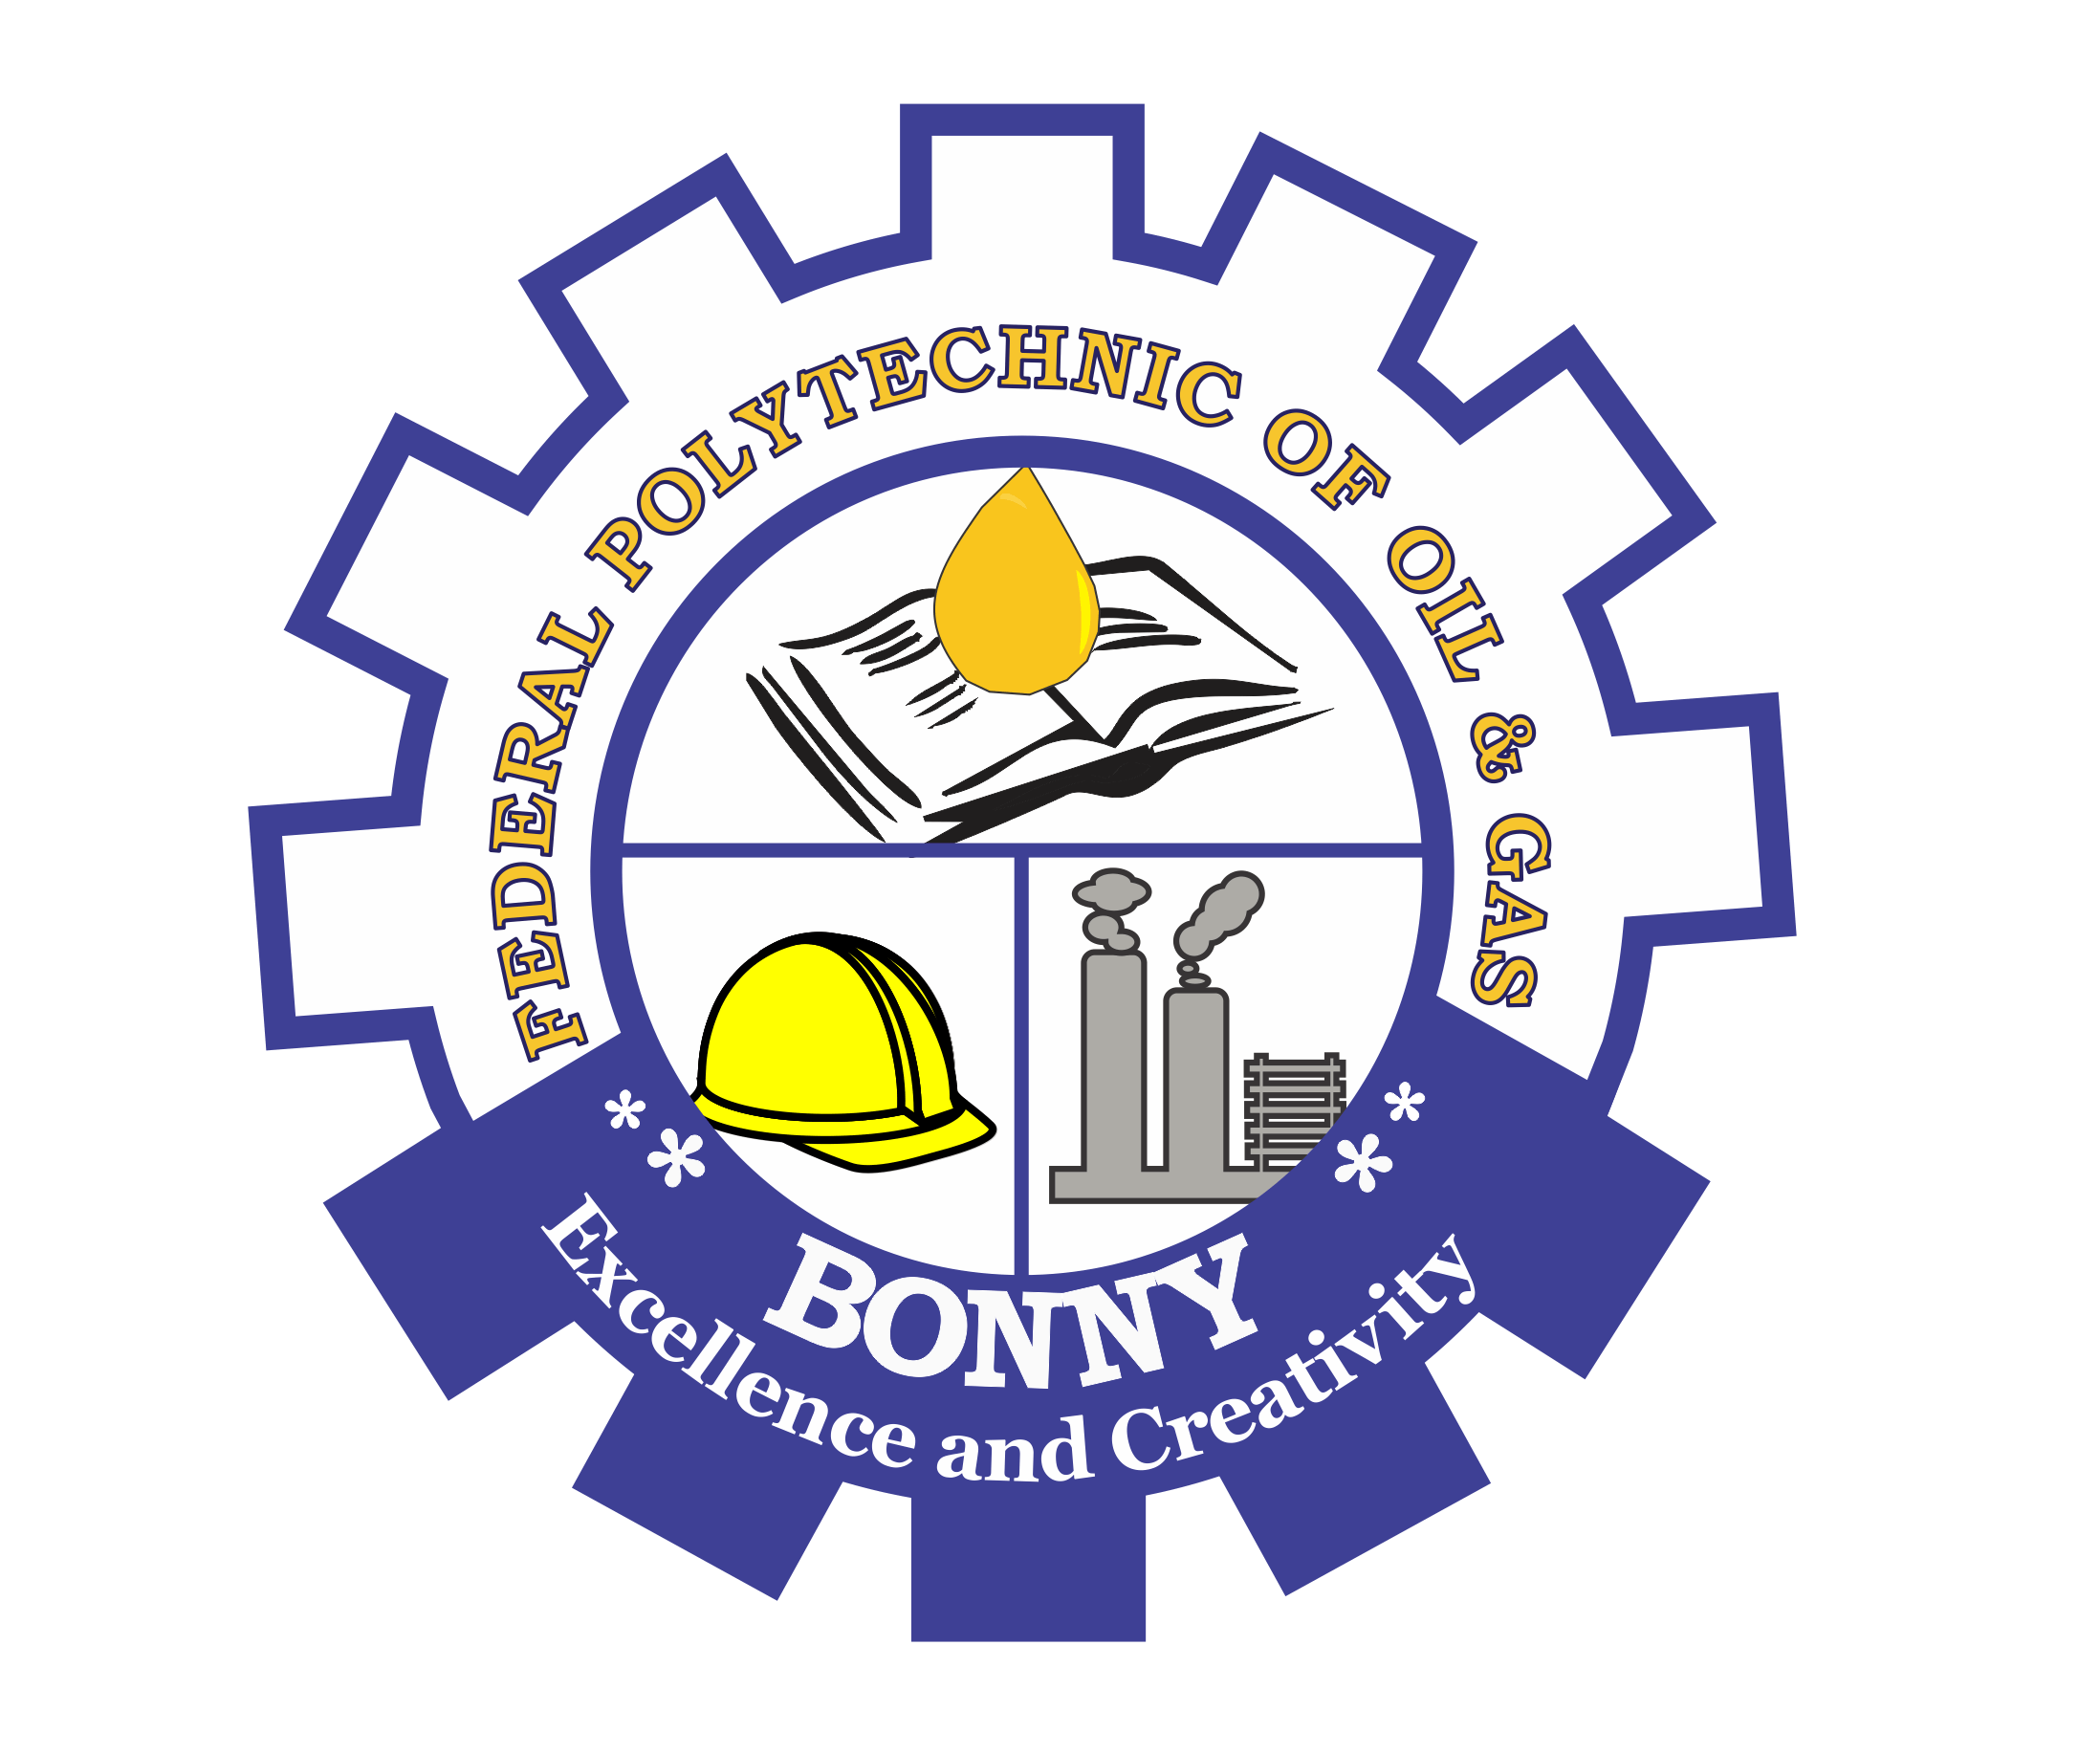 Federal Poly of Oil & Gas Bonny Admission List